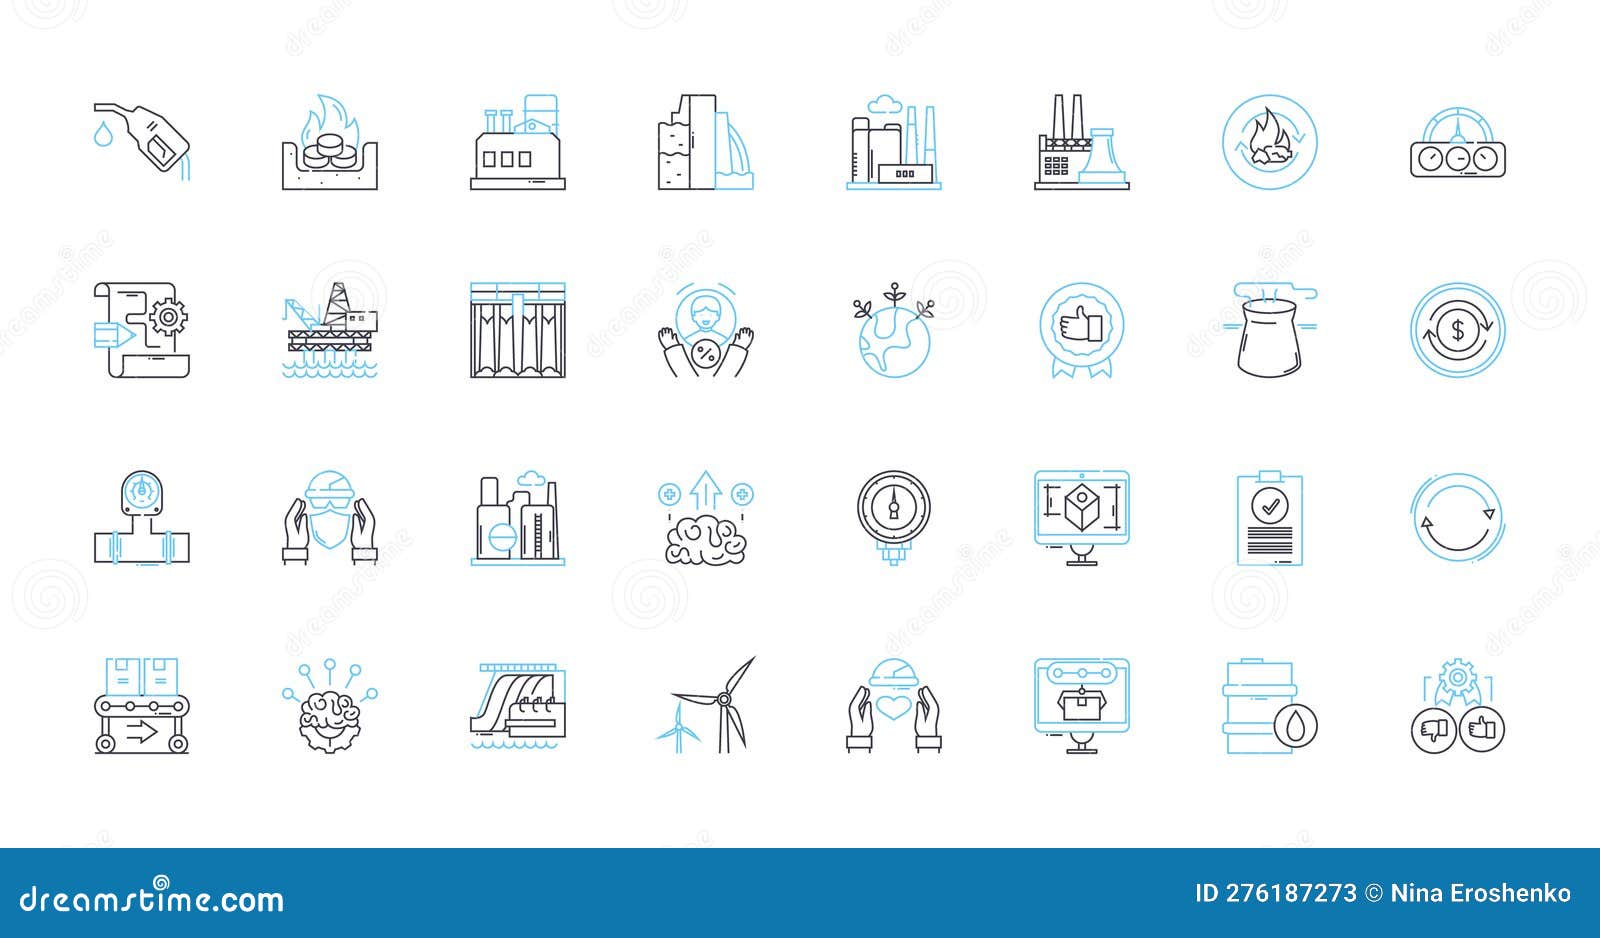 green technology linear icons set. solar, wind, geothermal, hydrogen, biomass, recycling, composting line  and